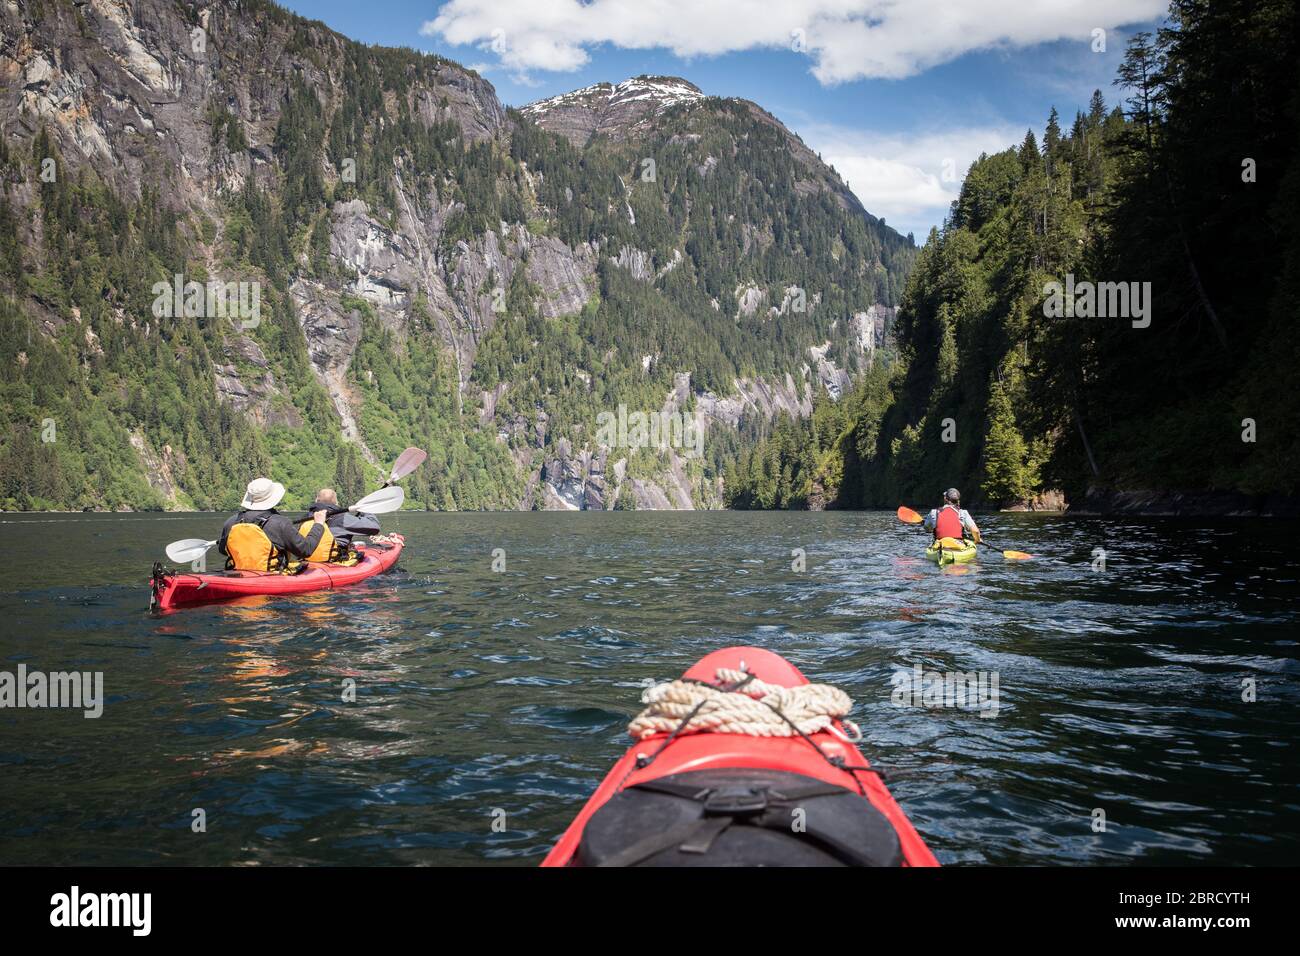 Misty Fjords National Monument, Southeast Alaska offers stunning scenery and opportunity to explore by kayak in Walker Cove. Stock Photo